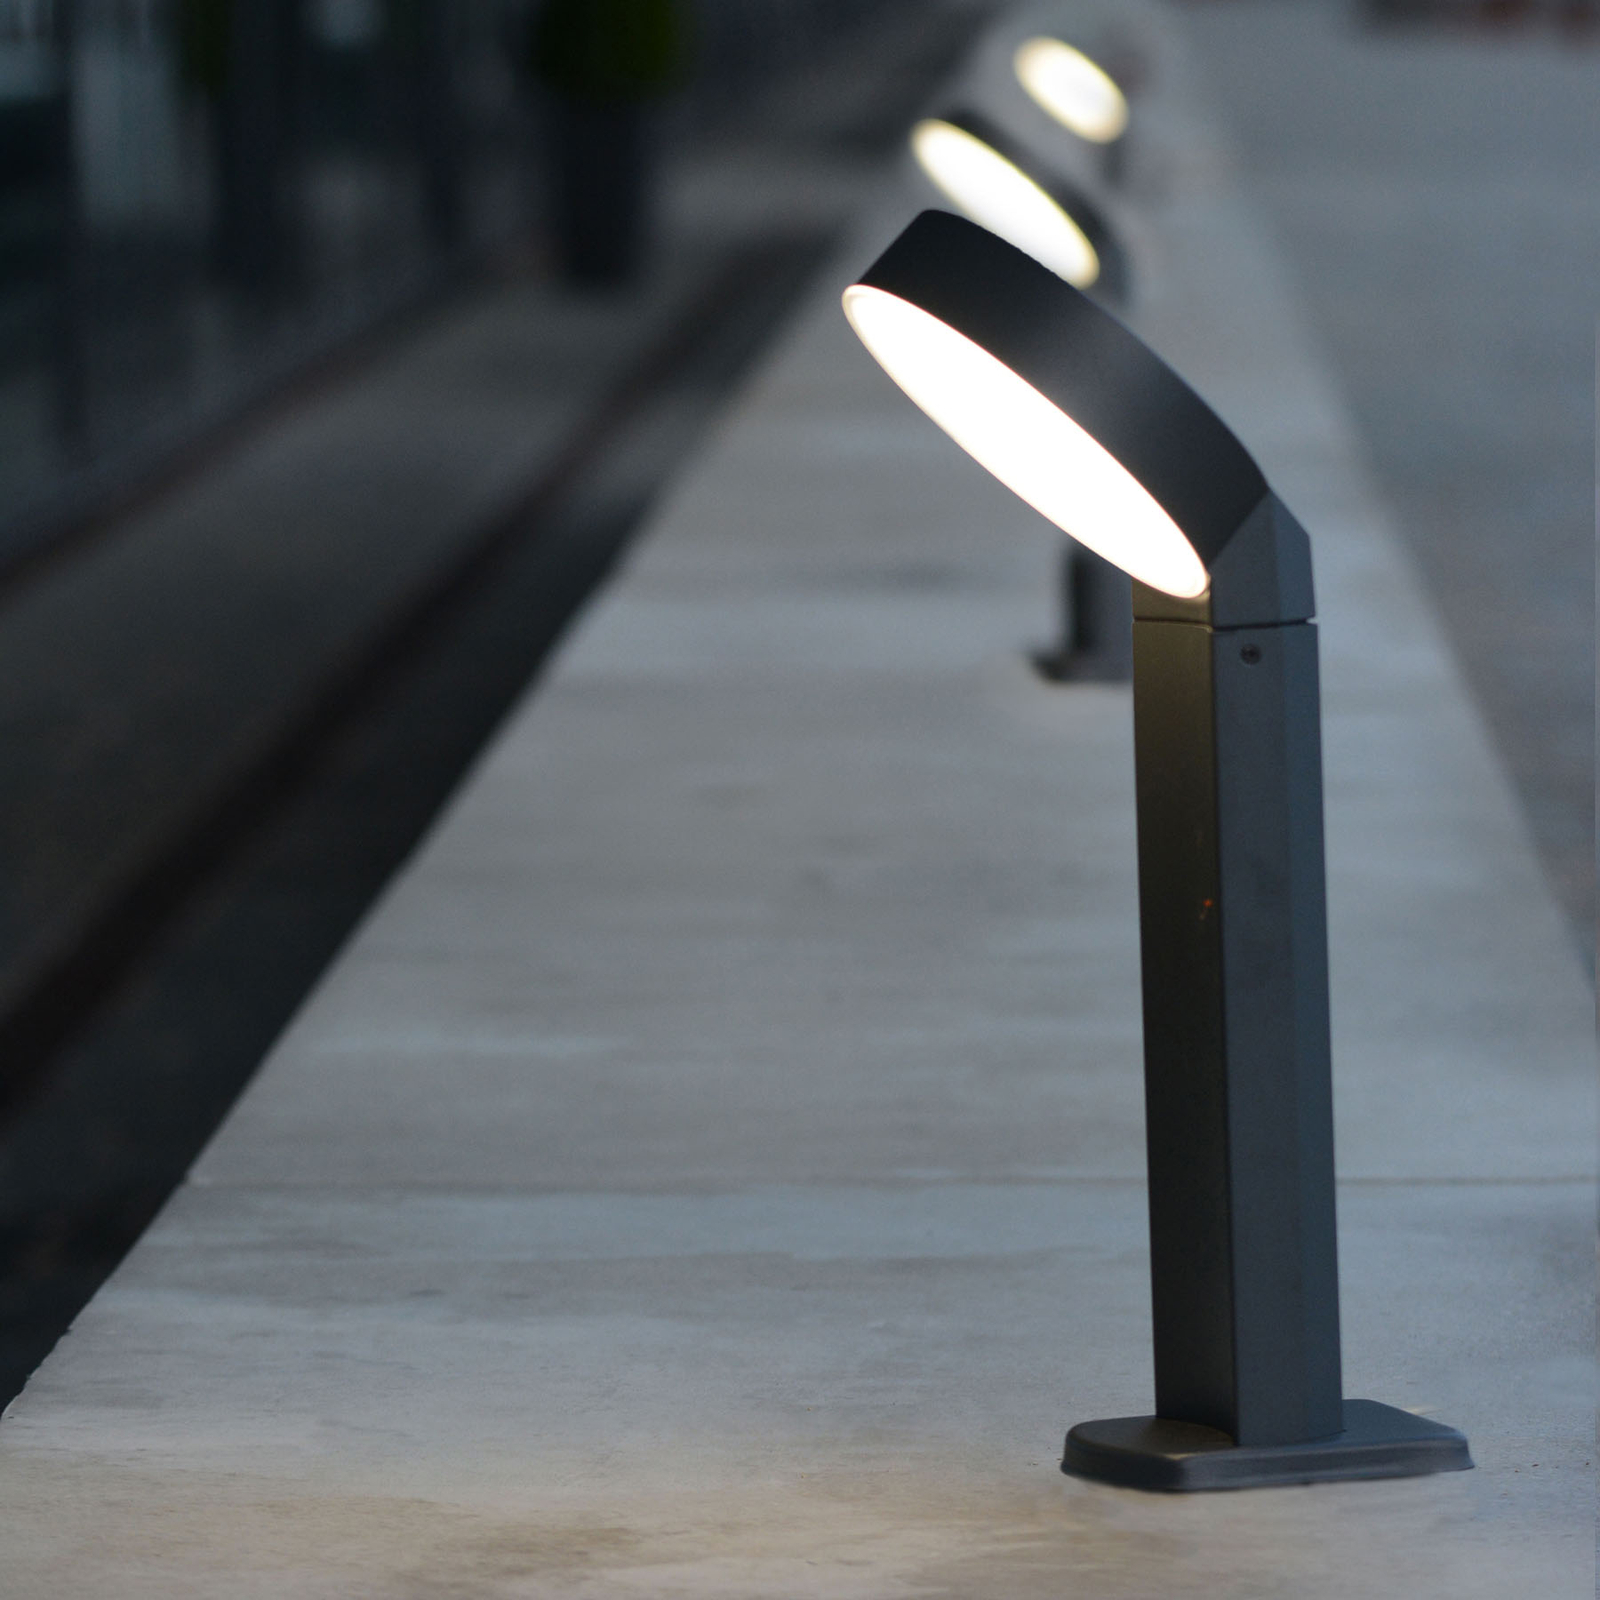 Meridian LED pillar light with ring-shaped head